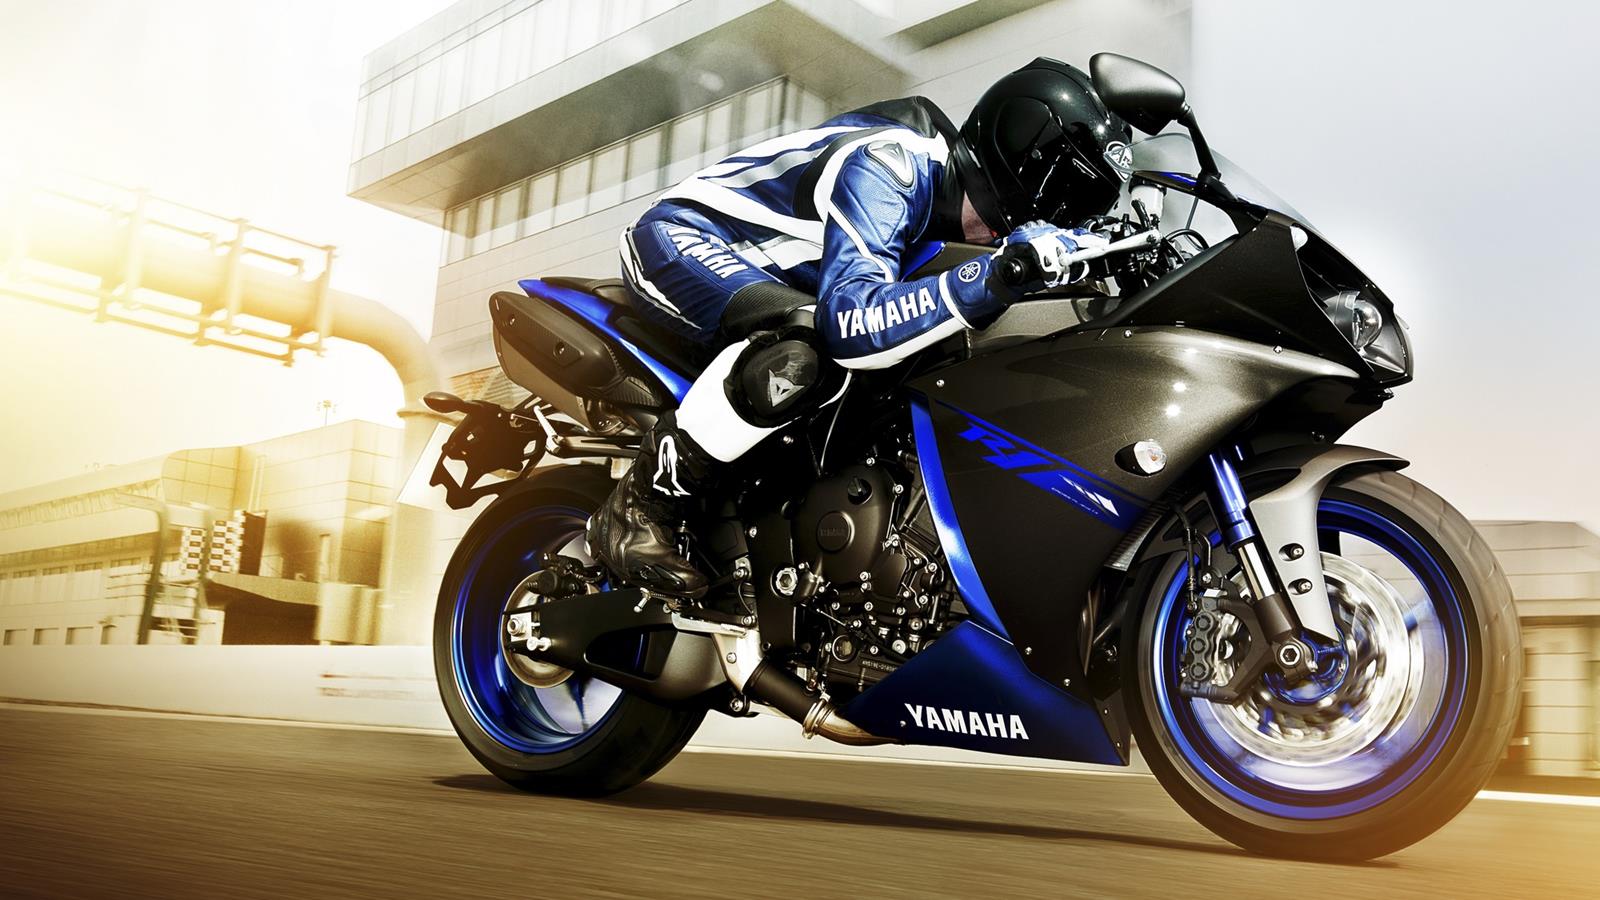 2014 Yamaha YZF-R1 in Motion